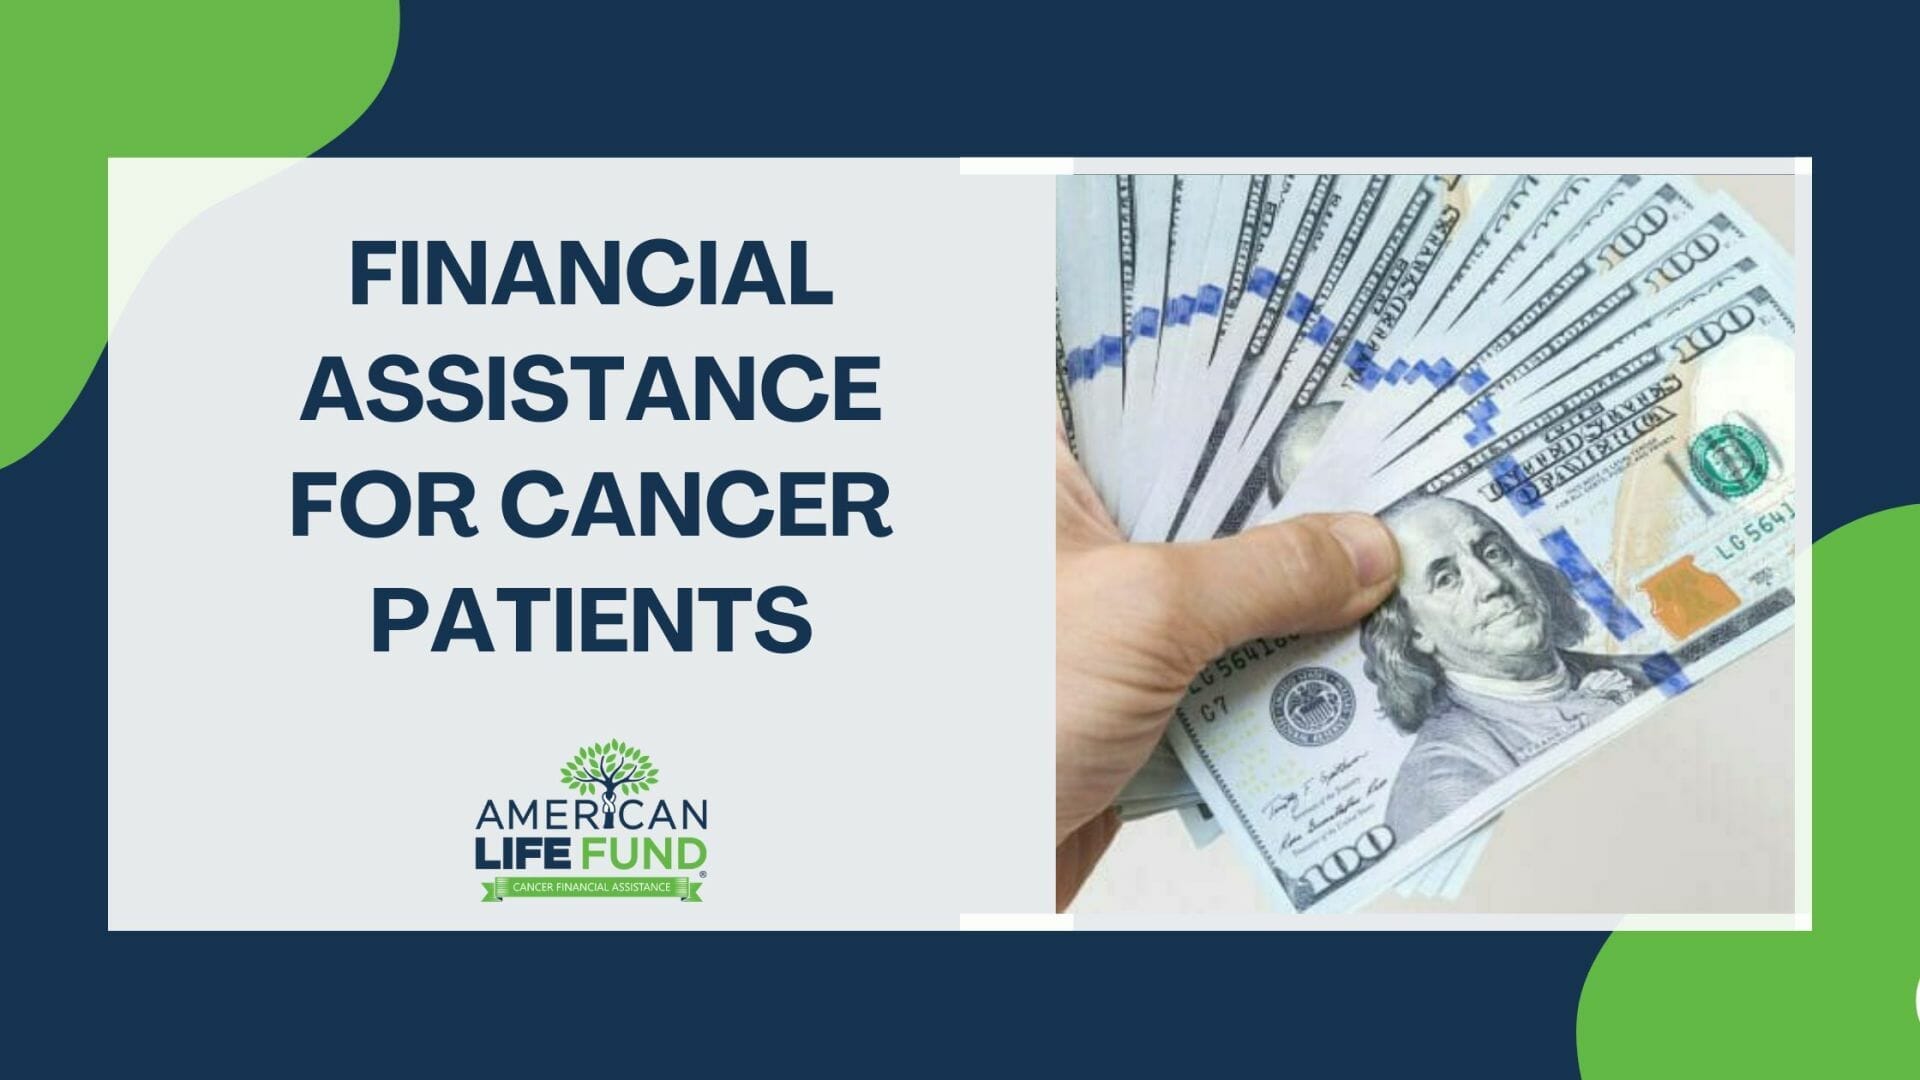 Blog featured image financial assistance for cancer patients. Person holding hand after receiving free money.